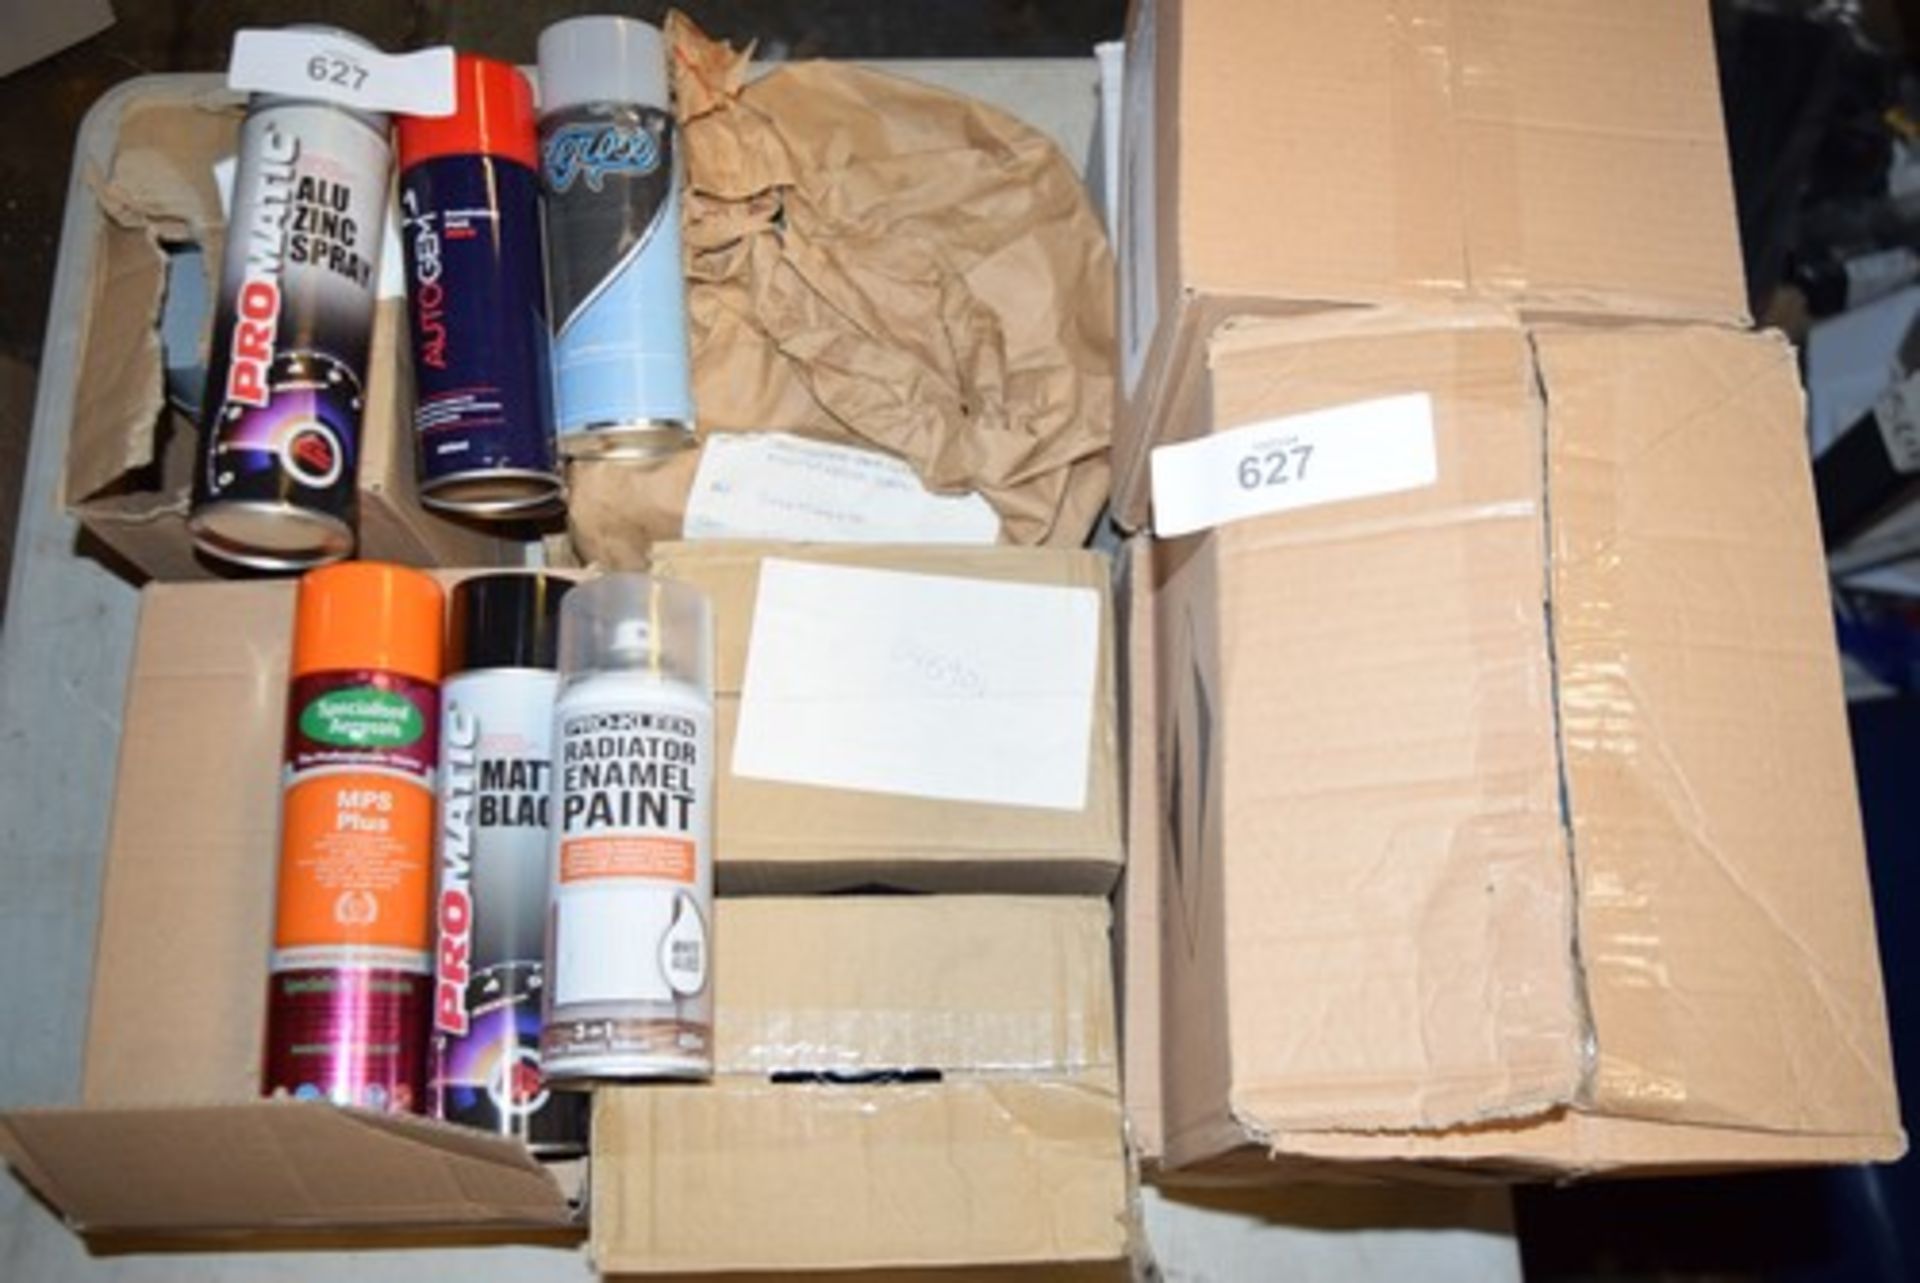 A selection of aerosols and sprays, including 24 x cans of corrosion protection, 48 x cans of Mr